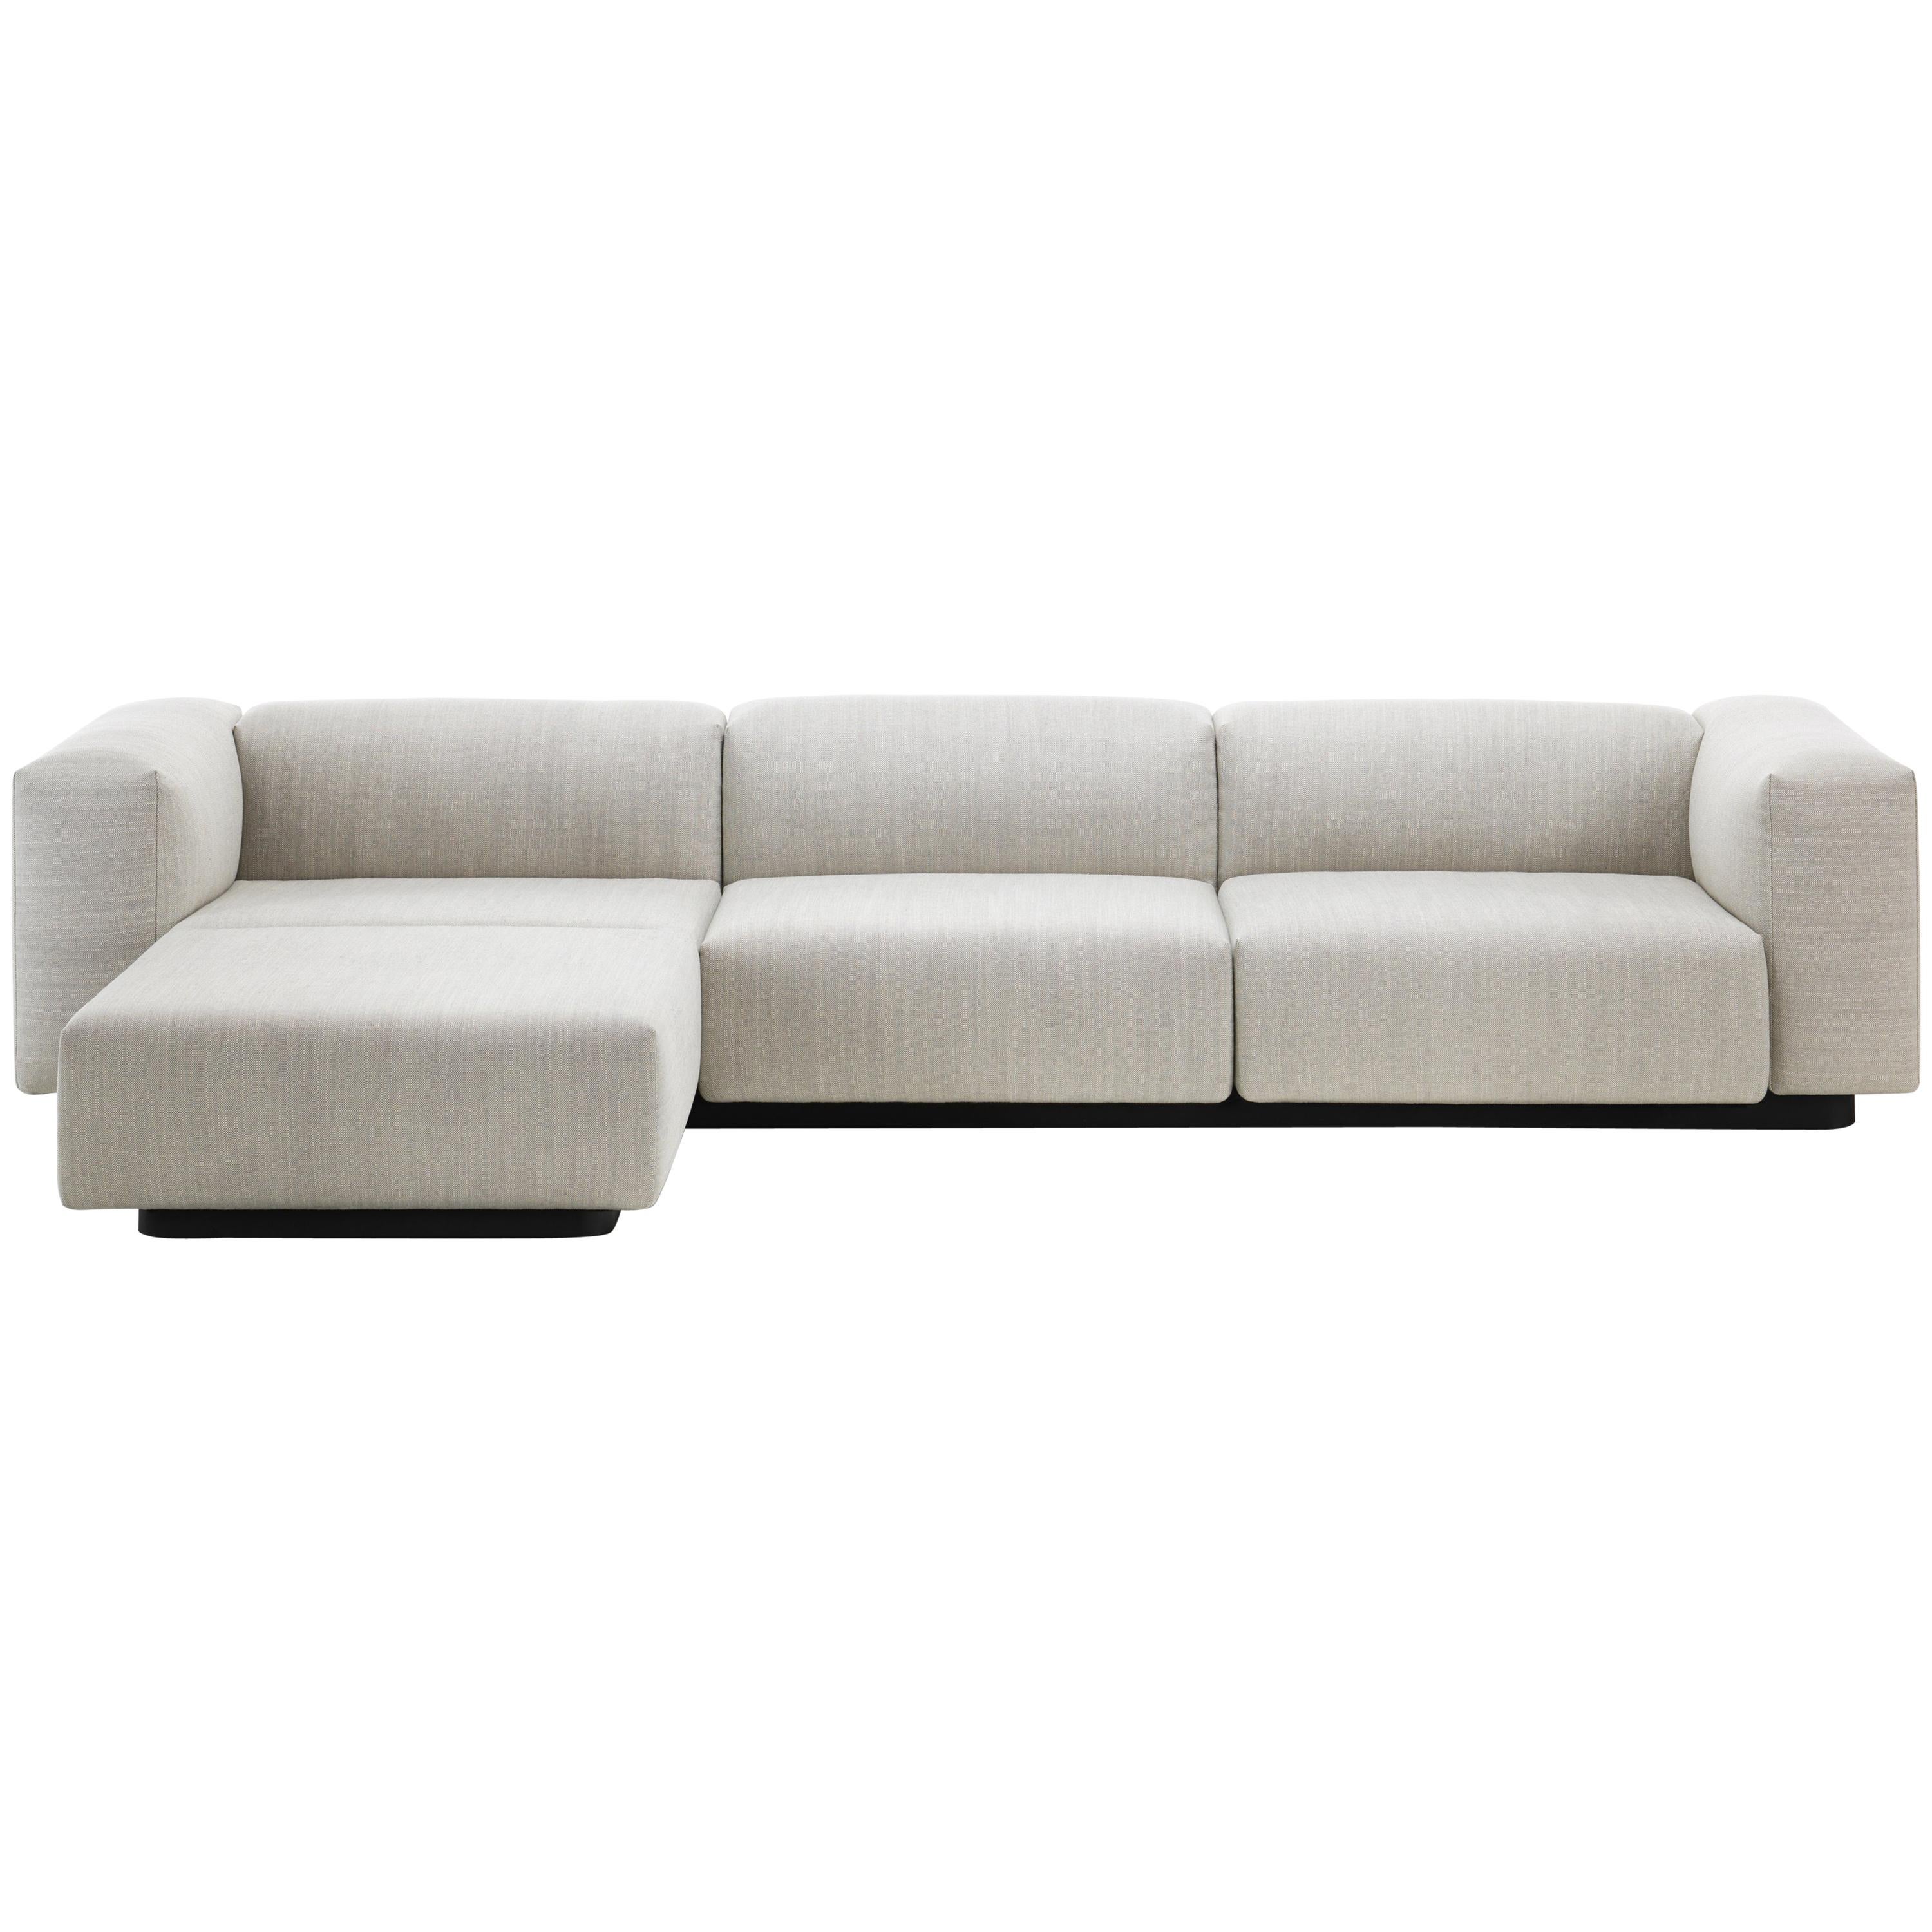 Vitra Soft Modular Three-Seat Sofa in Pearl Reed with Chaise by Jasper Morrison For Sale